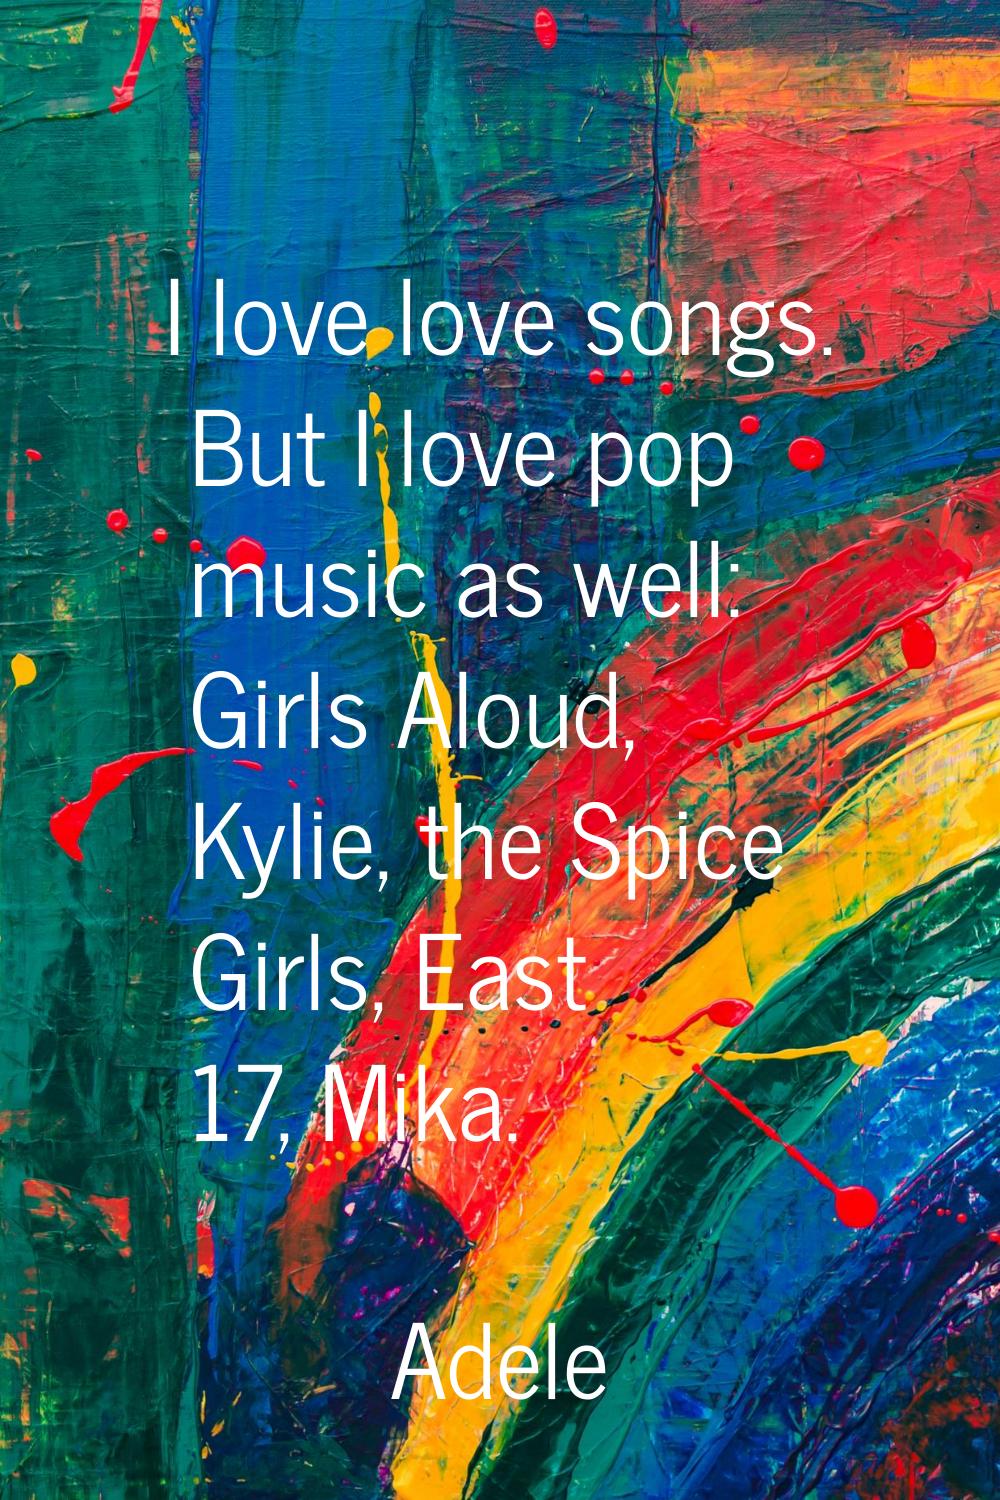 I love love songs. But I love pop music as well: Girls Aloud, Kylie, the Spice Girls, East 17, Mika